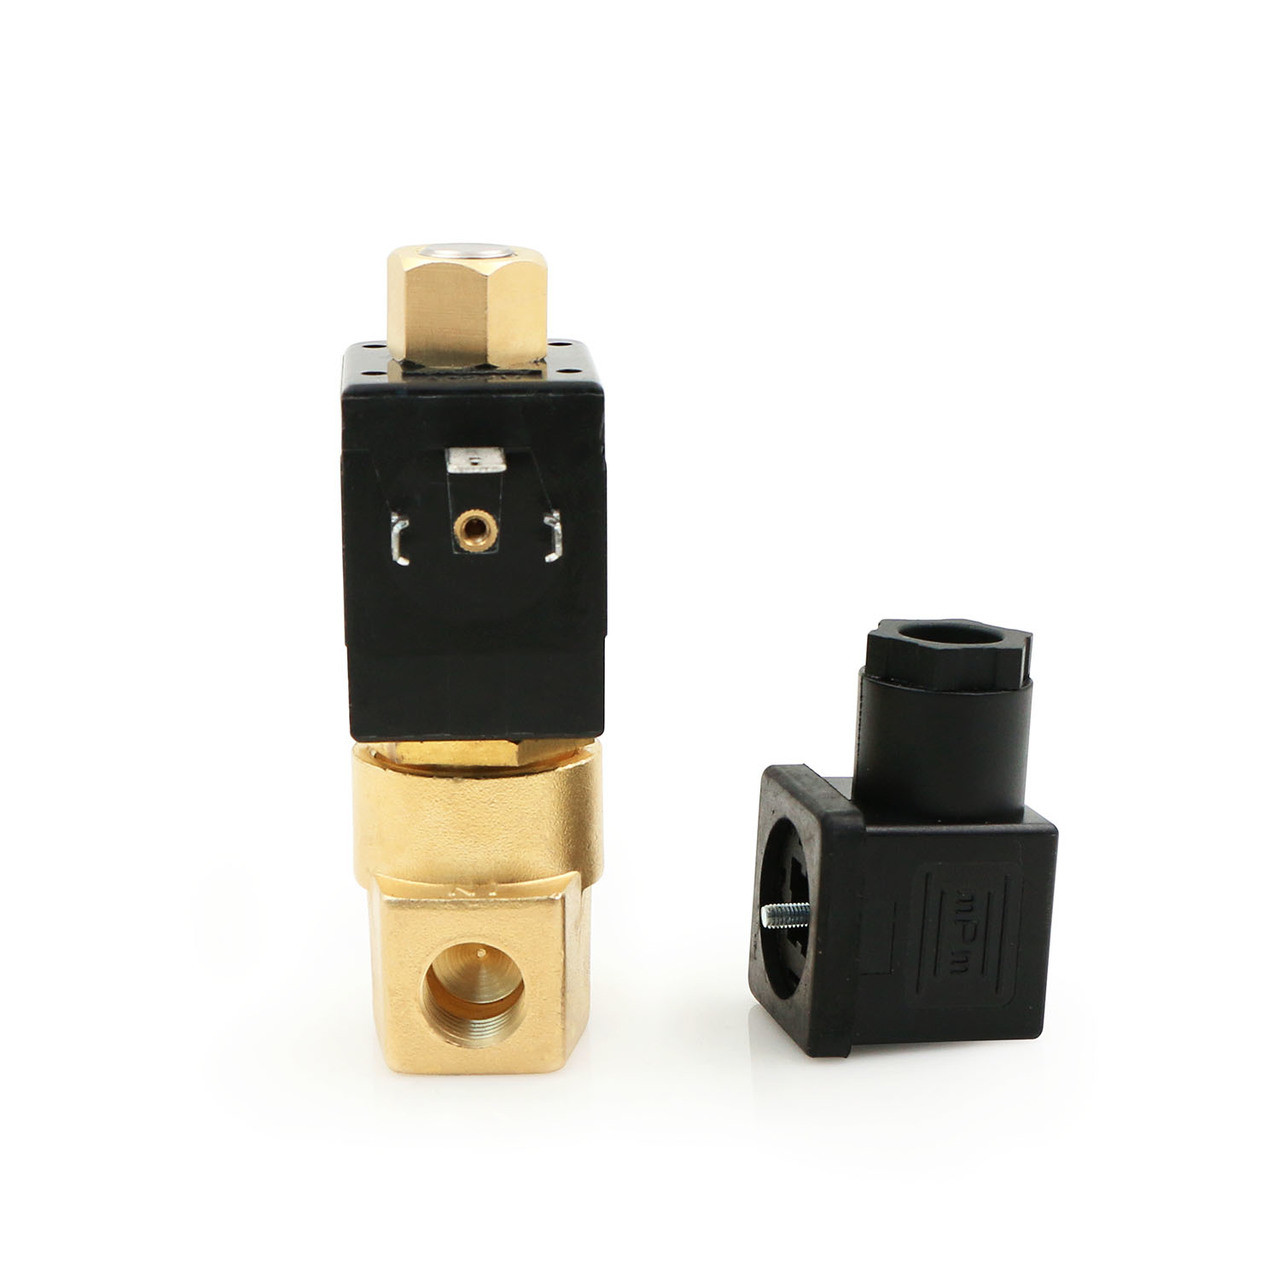 1/4 Brass 12V DC Electric Solenoid Valve NPT NBR SEAL Normally Open Air, Water. 